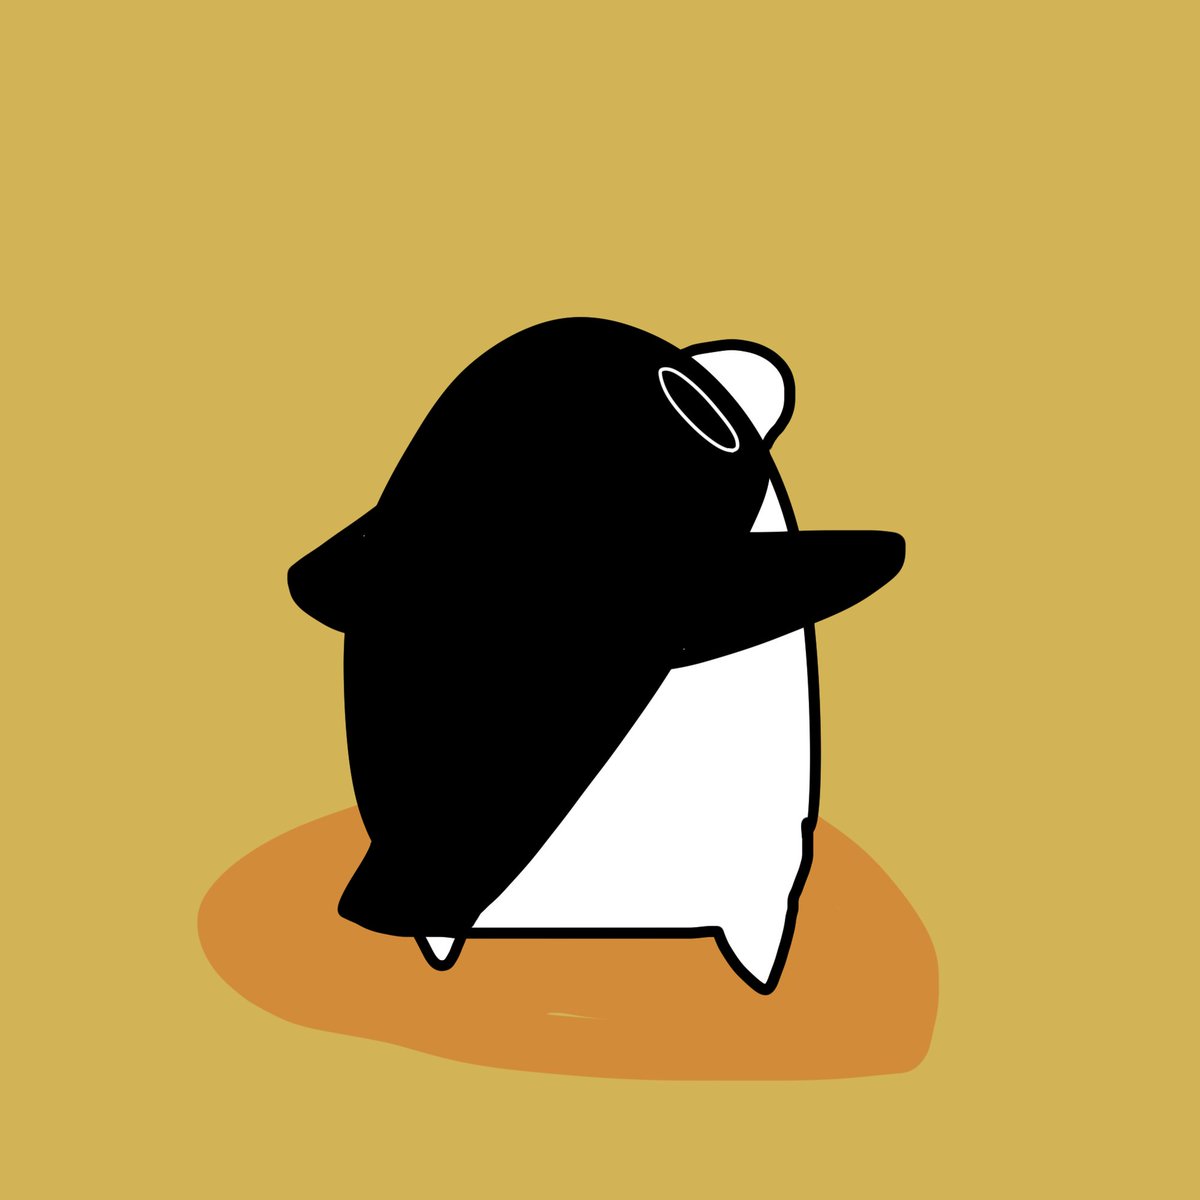 no humans penguin simple background animal focus animal yellow background standing  illustration images